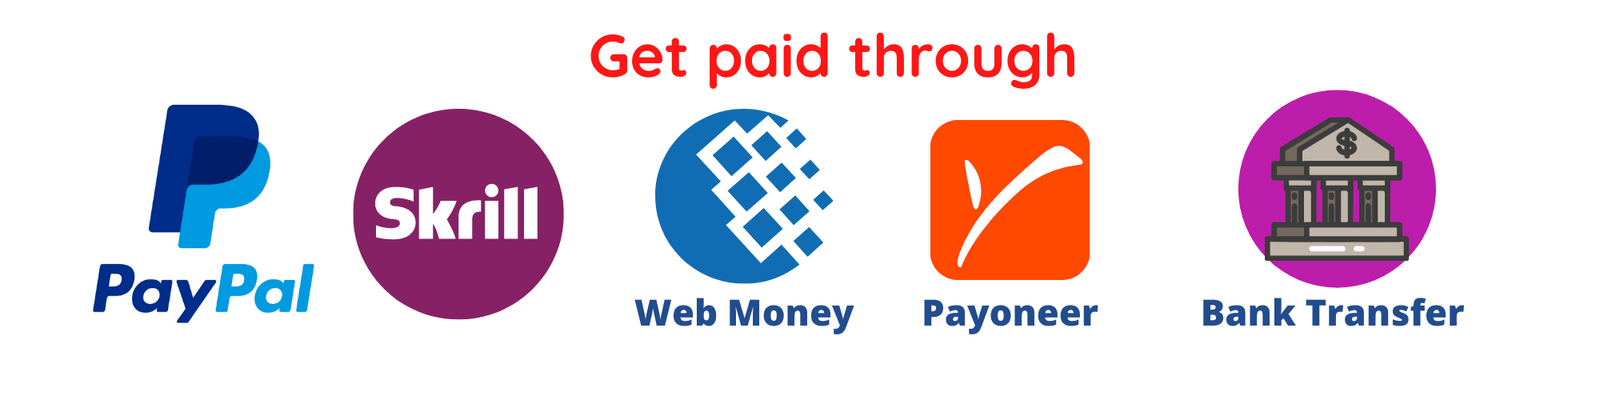 Get paid on request